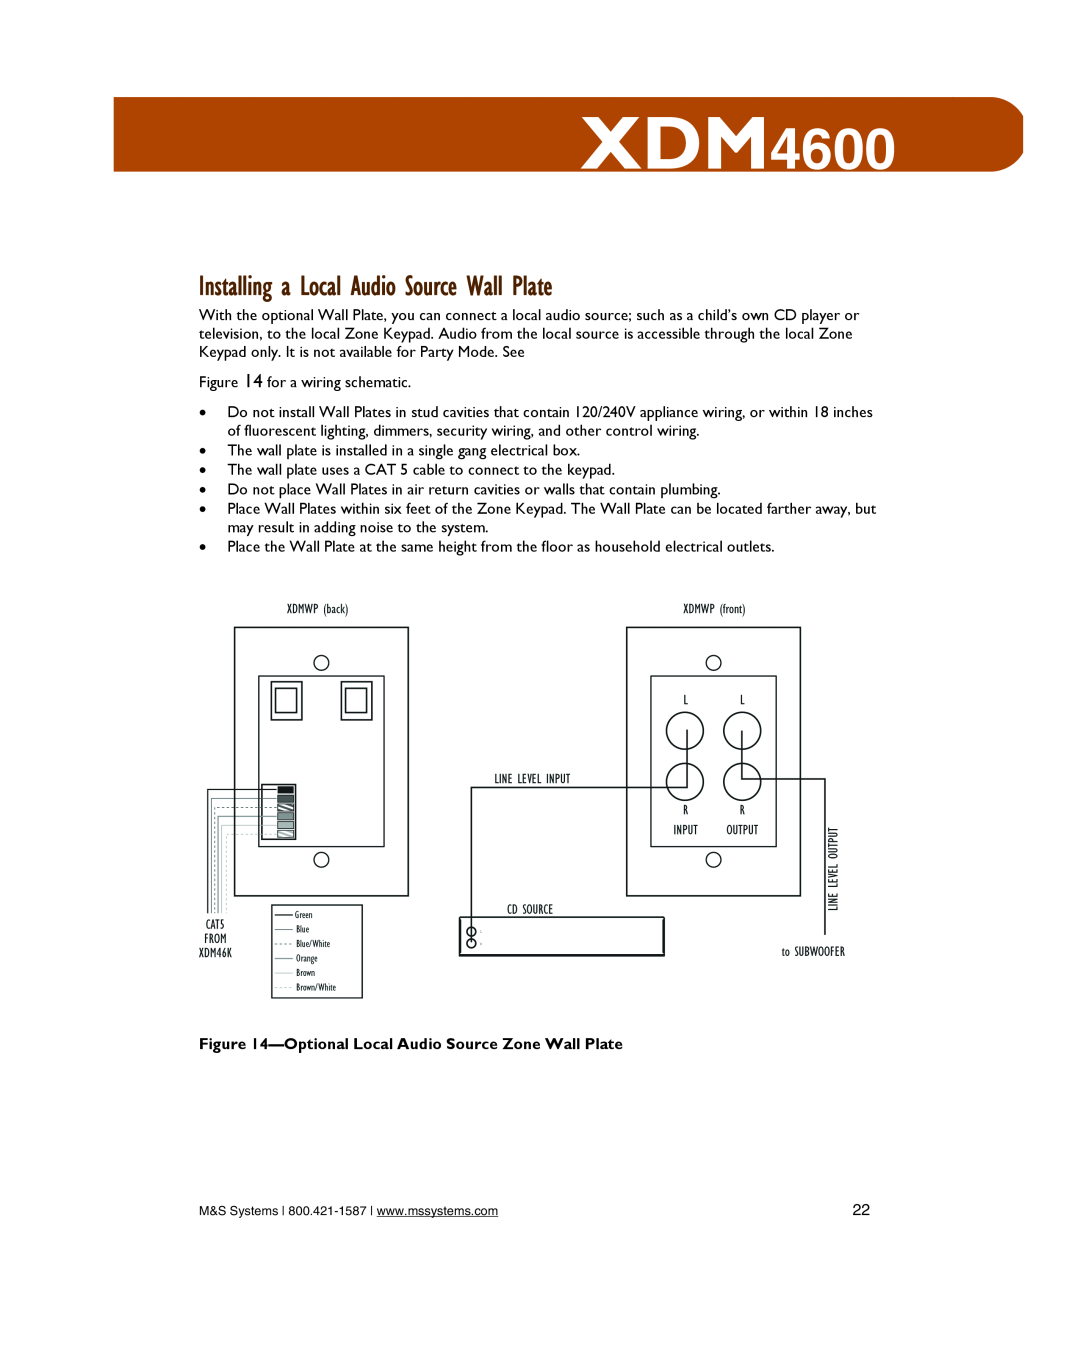 M&S Systems XDM4600 owner manual Installing a Local Audio Source Wall Plate 